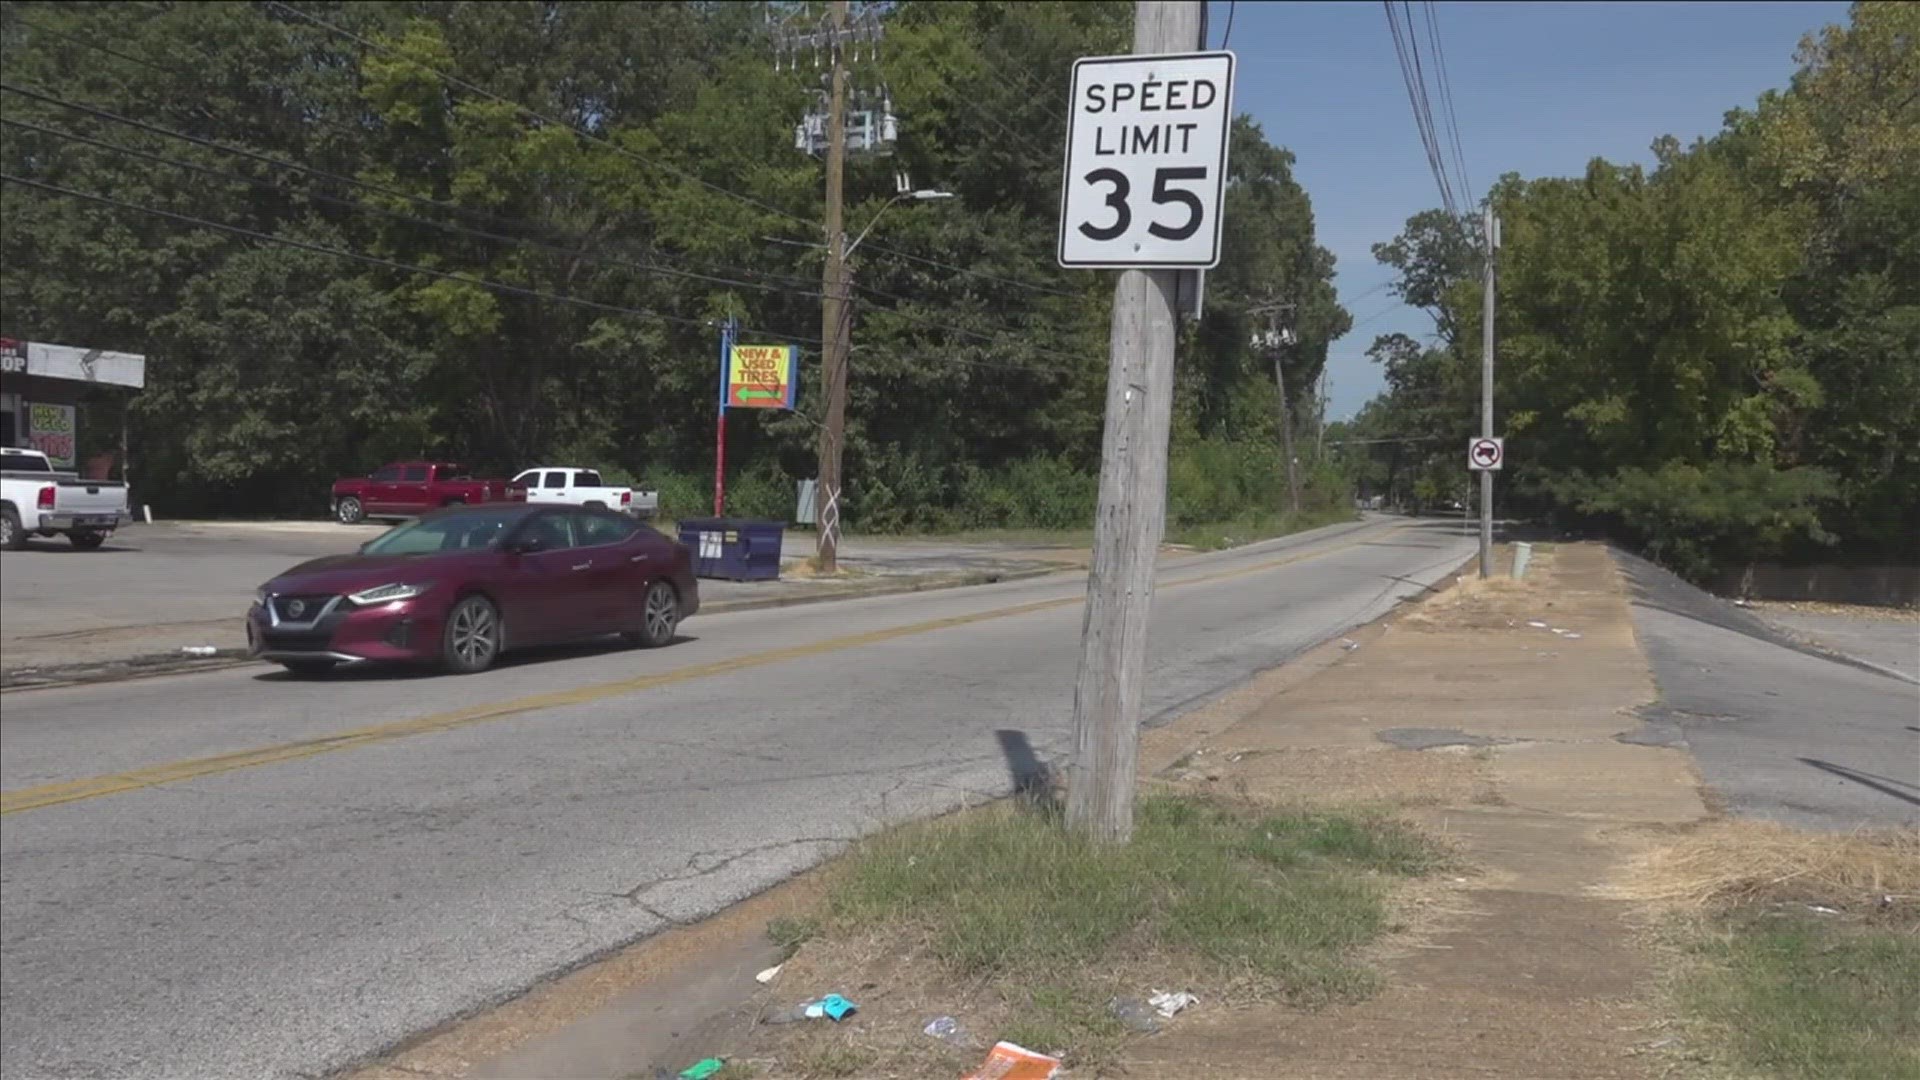 More deadly accidents and pedestrian strikes are happening, and Raleigh residents say they can't get speed bumps on the major road since it's owned by the state.